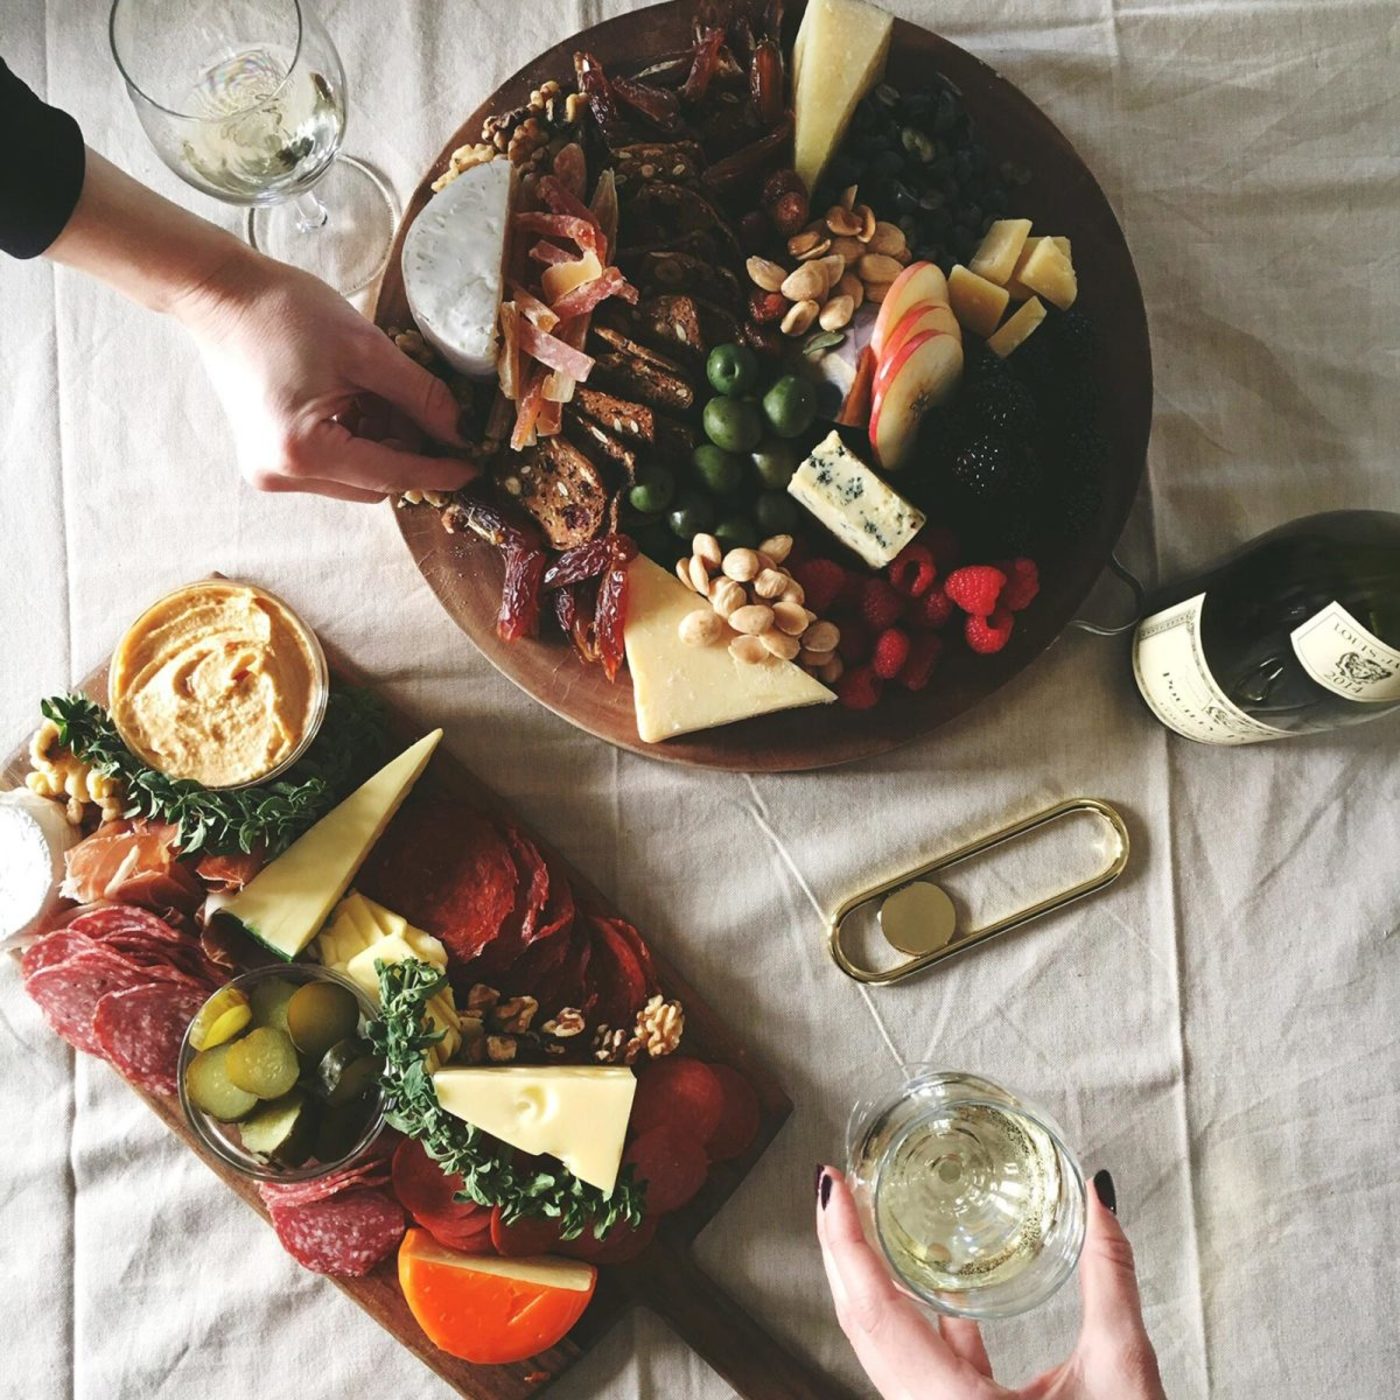 flat lay of charcuterie and cheese plate with wine glasses and bottles and a bottle opener